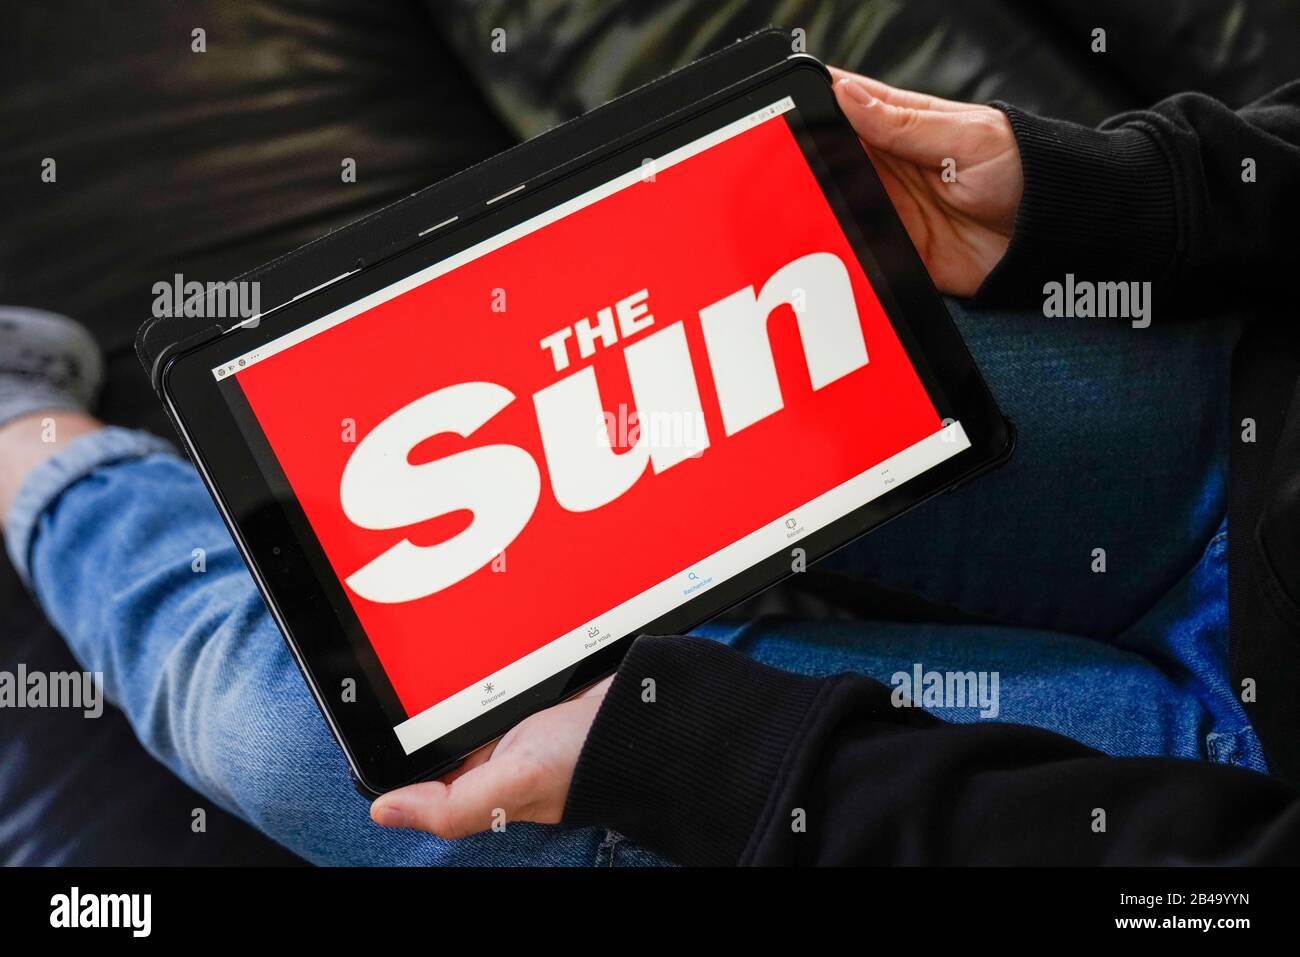 Bordeaux , Aquitaine / France - 11 27 2019 : The Sun screen tablet of tabloid british best-selling newspaper Stock Photo